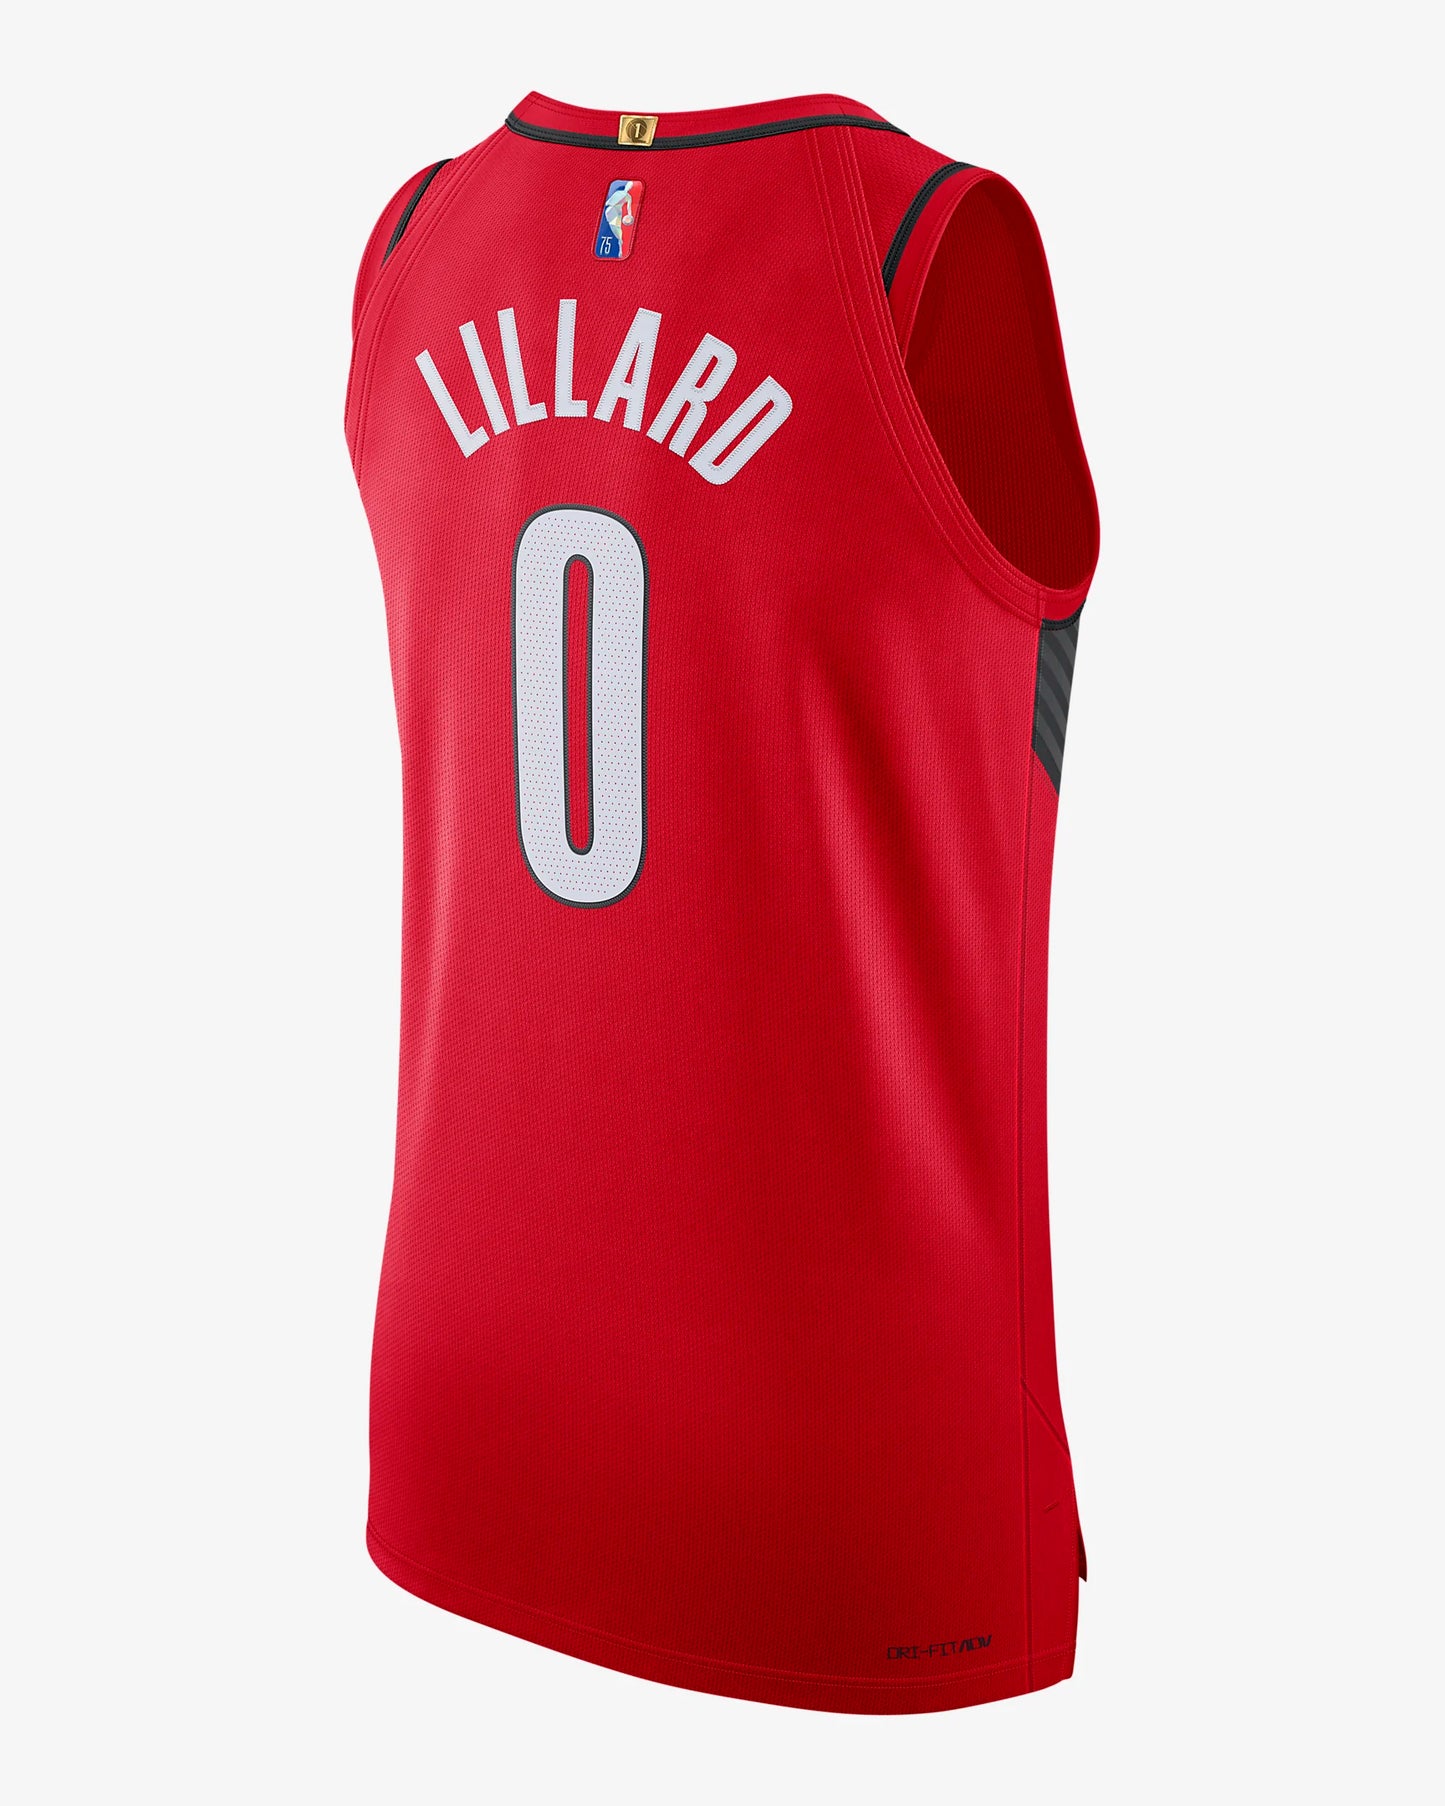 Portland Trail Blazers red 'Statement' jersey gets an update for